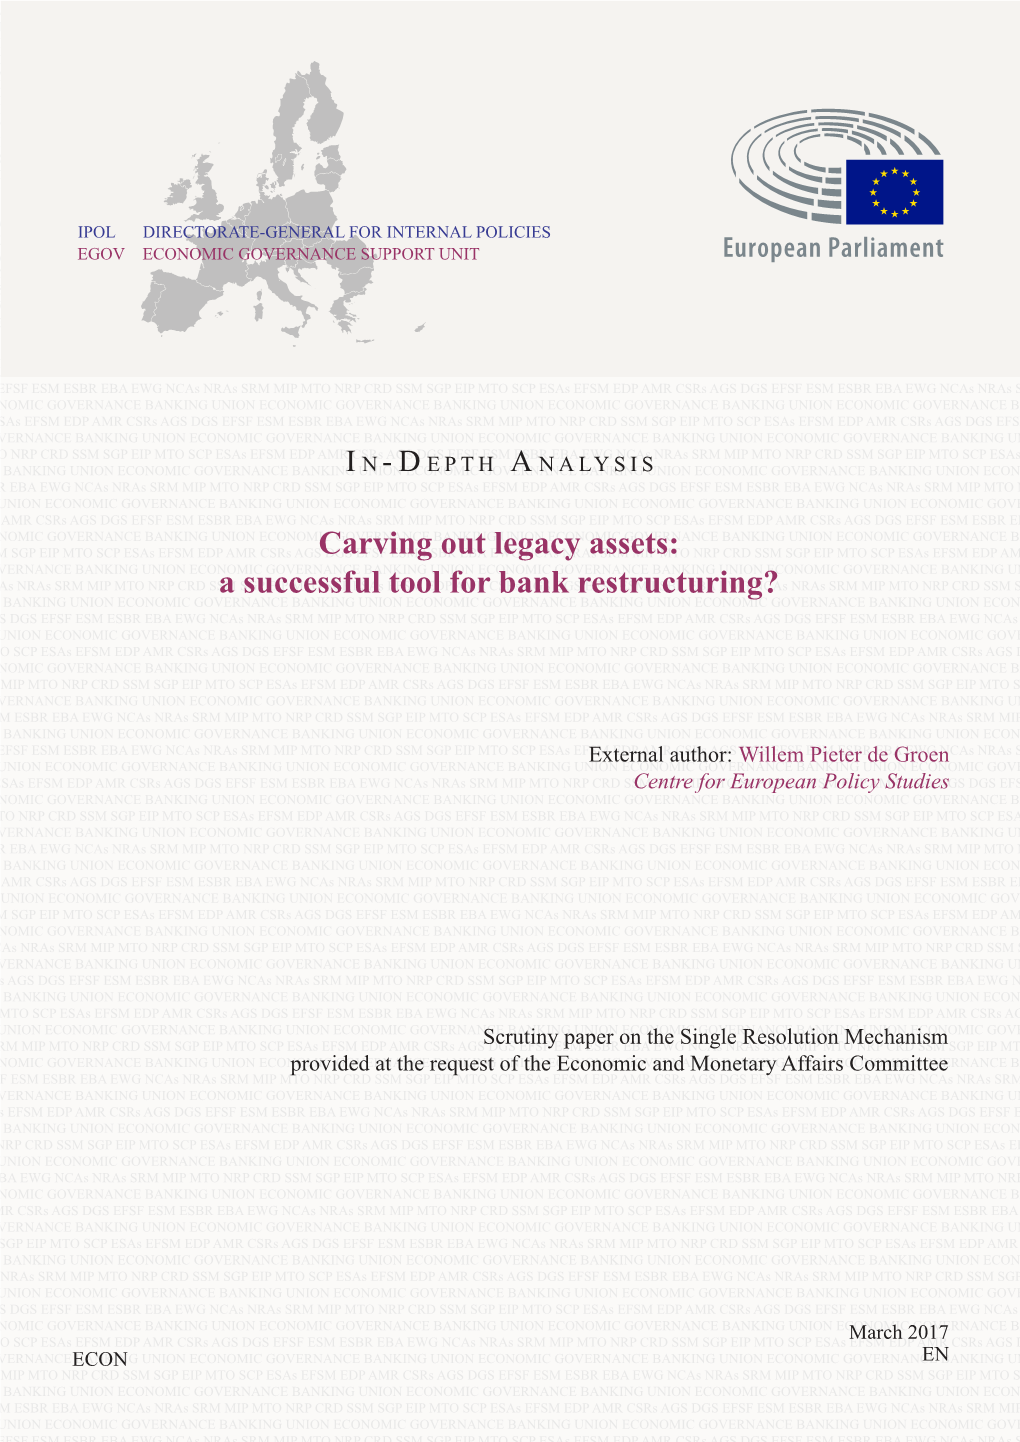 Carving out Legacy Assets: a Successful Tool for Bank Restructuring?